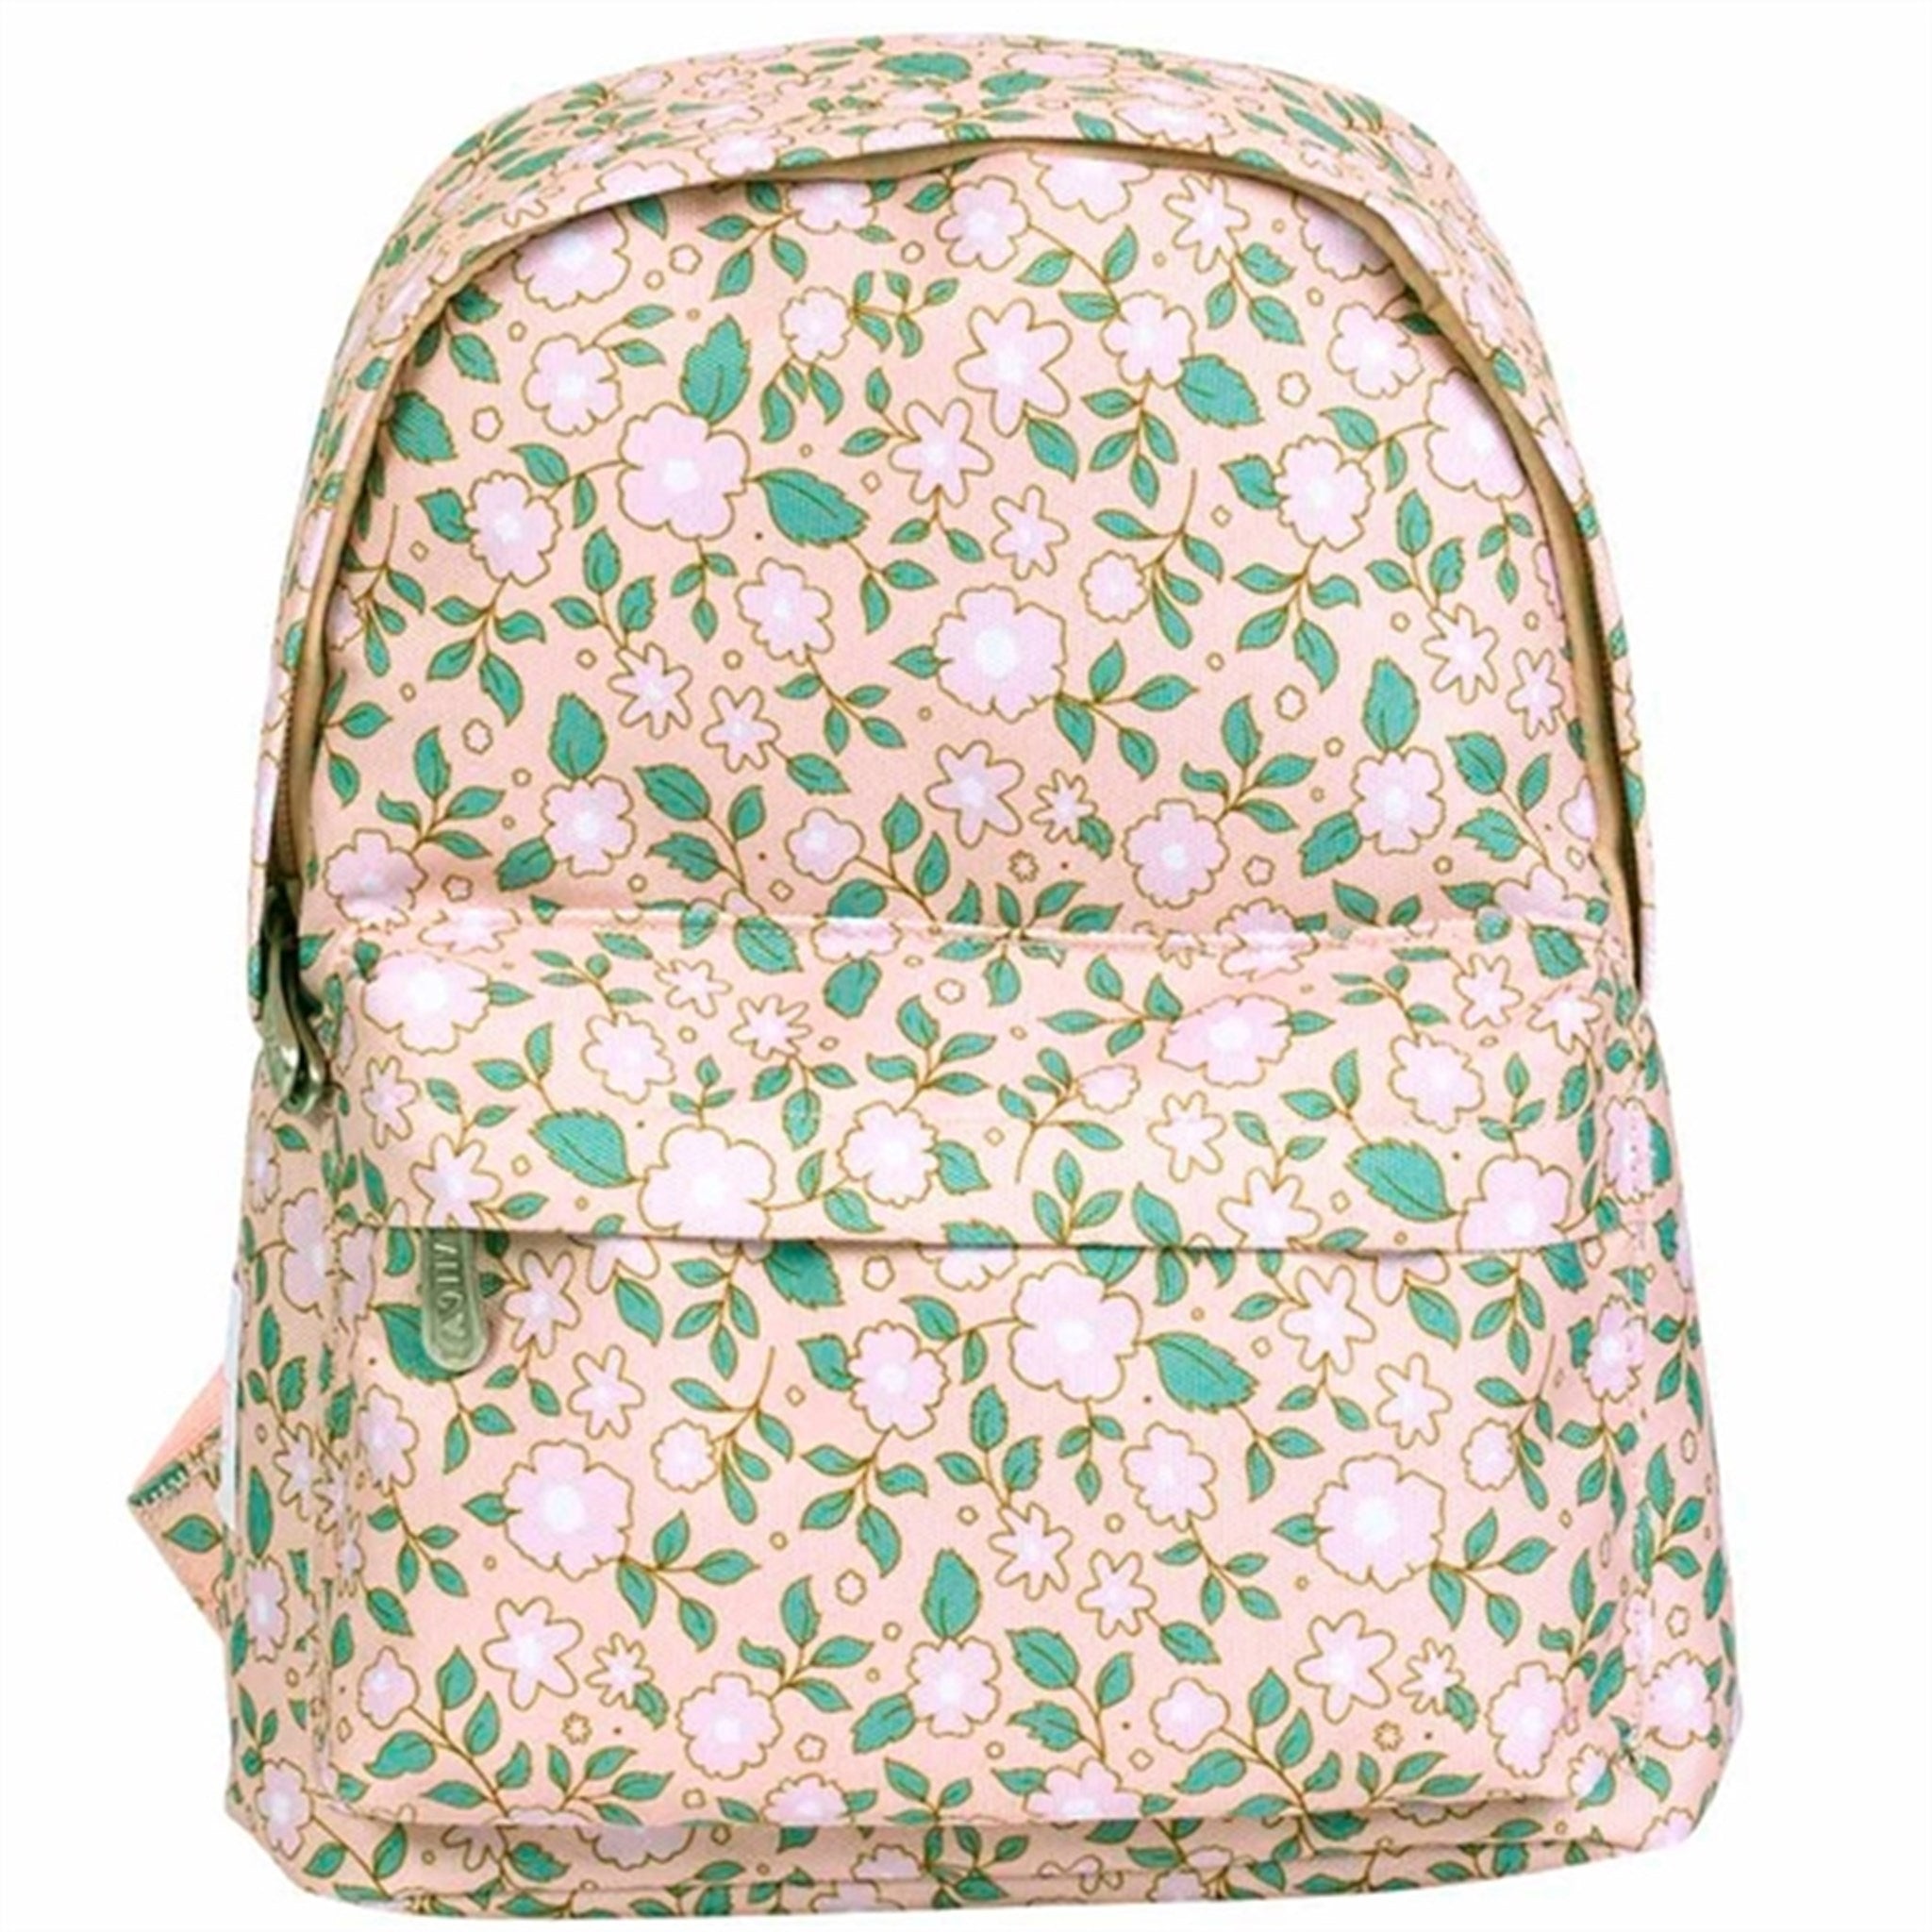 A Little Lovely Company Backpack Small Blossom Pink